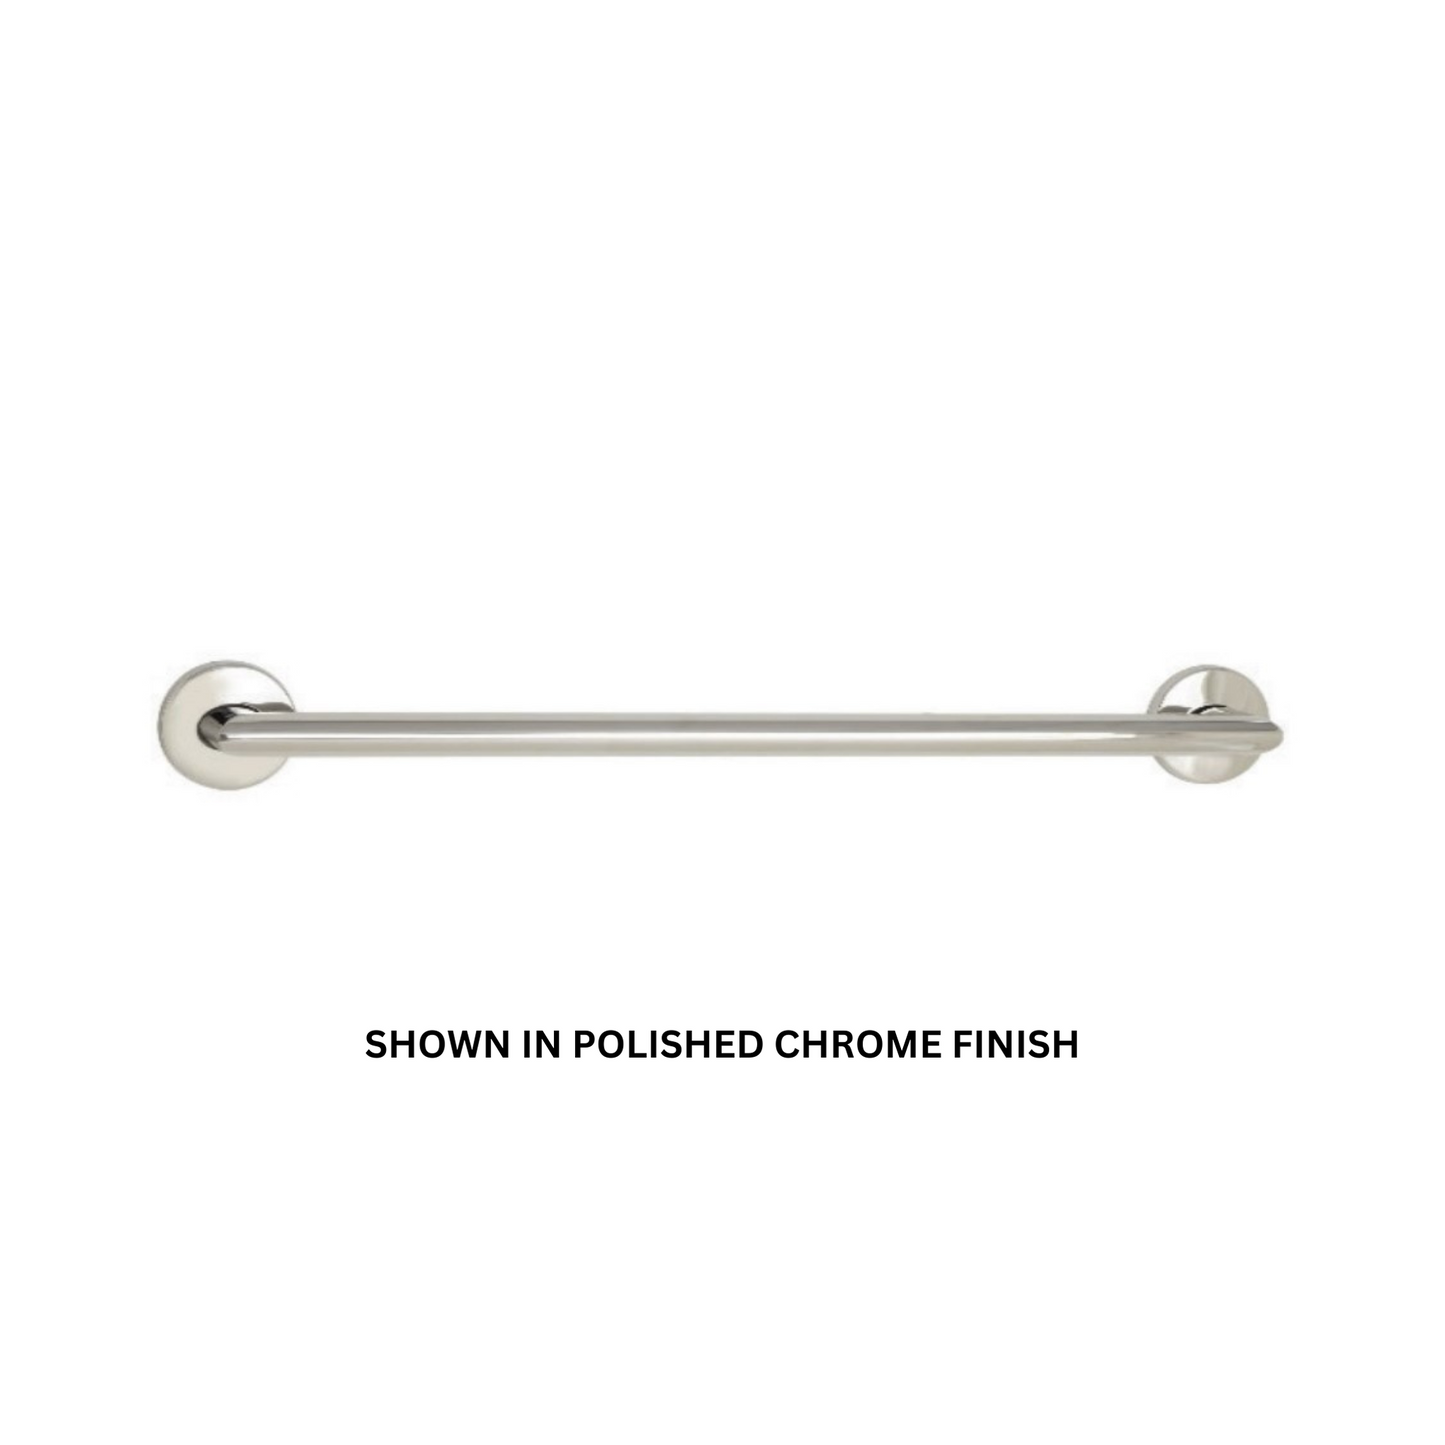 Seachrome Coronado 48" Almond Powder Coat 1.5" Concealed Flanges Oval Grab Bar With Mitered Corners